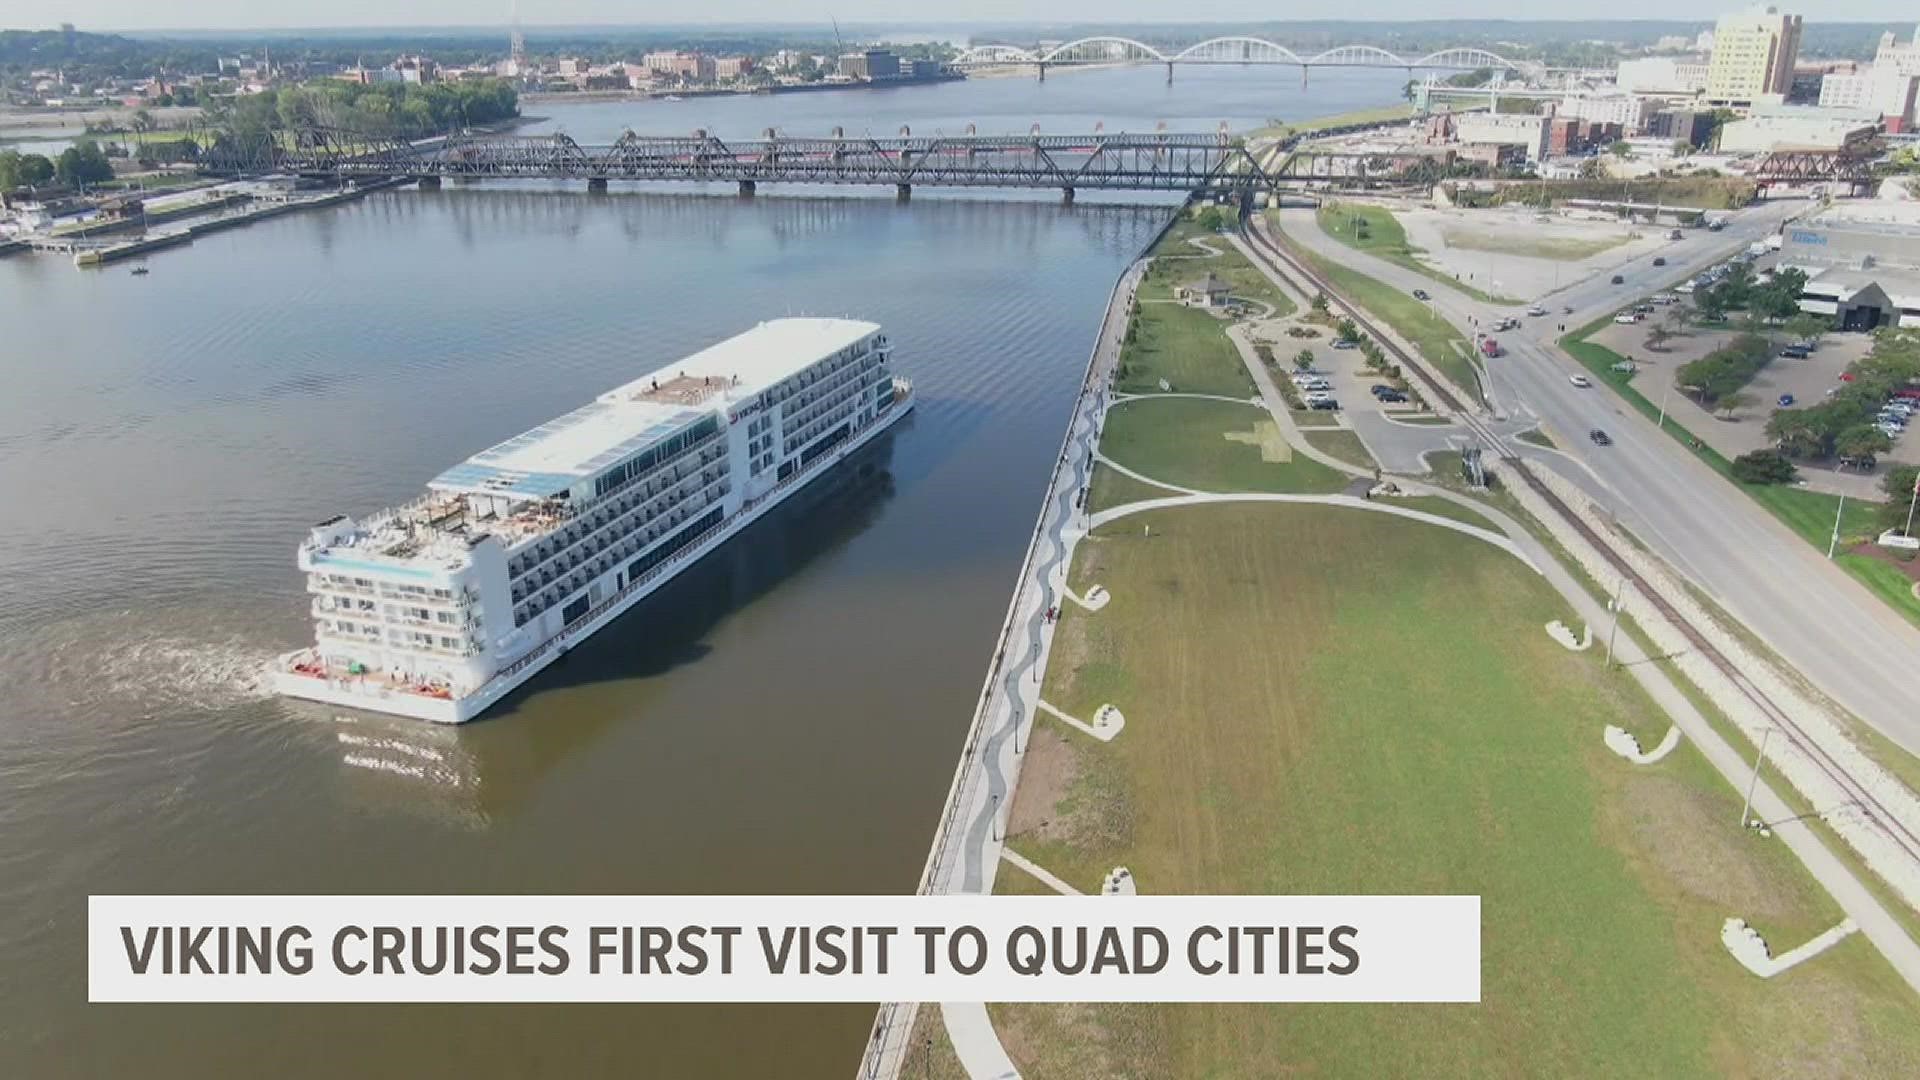 The state-of-the-art river ship will make stops in the Quad Cities for years to come.